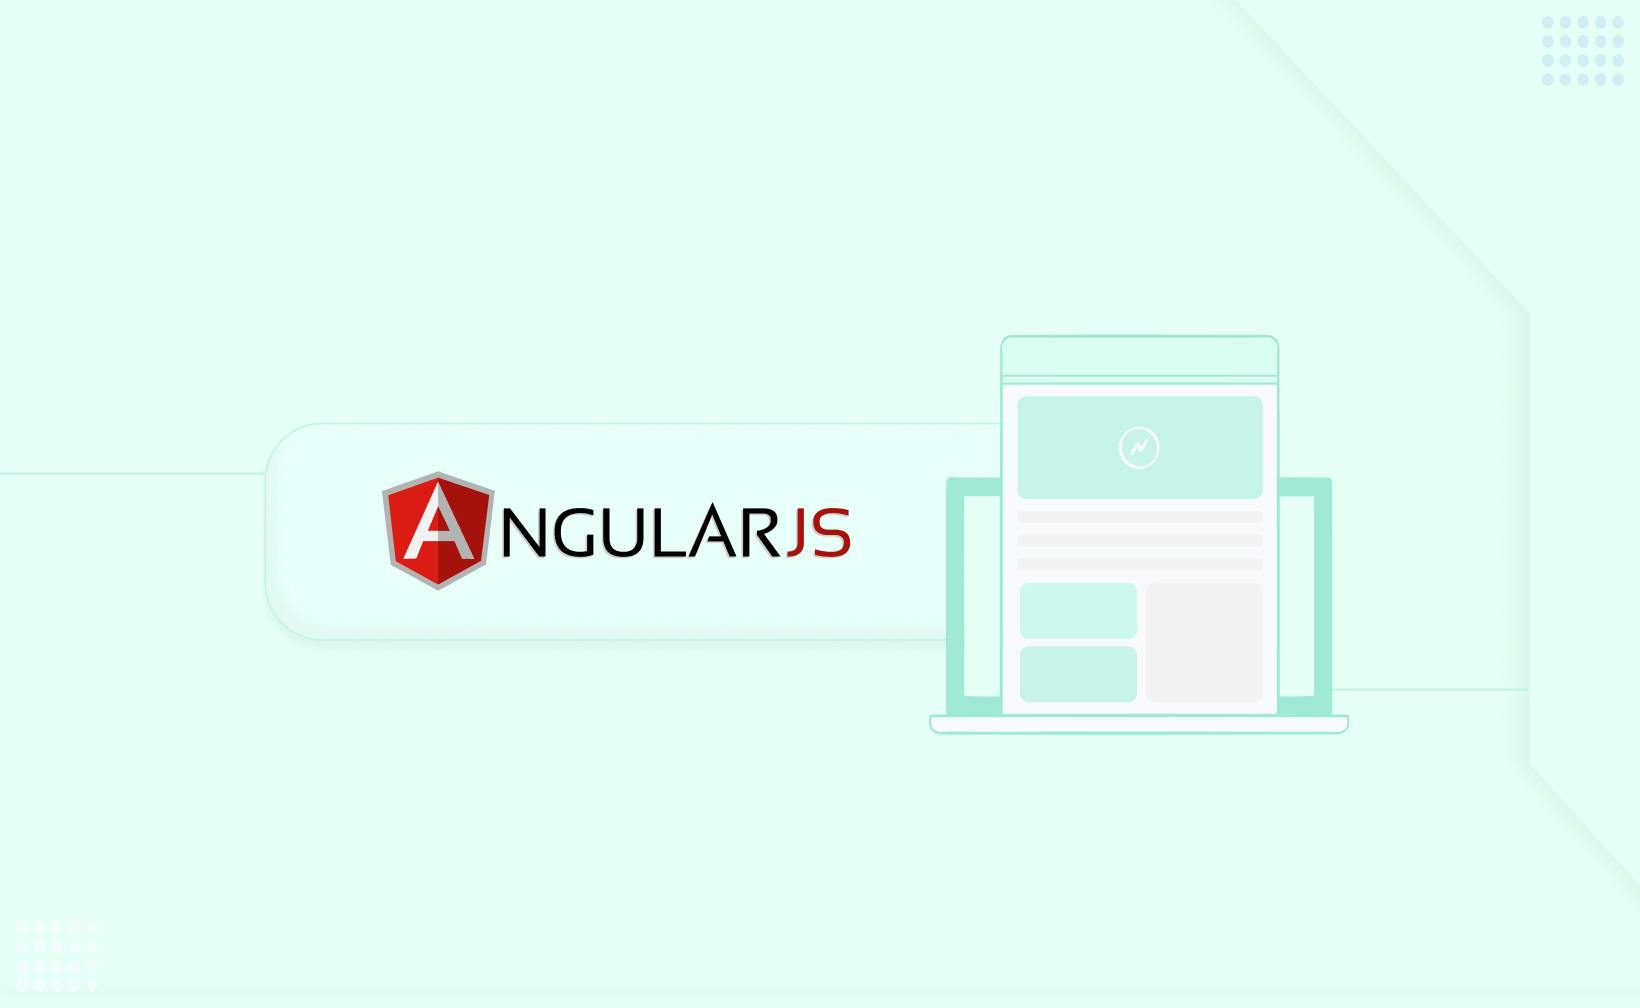 How to Build a Single Page Application in AngularJS